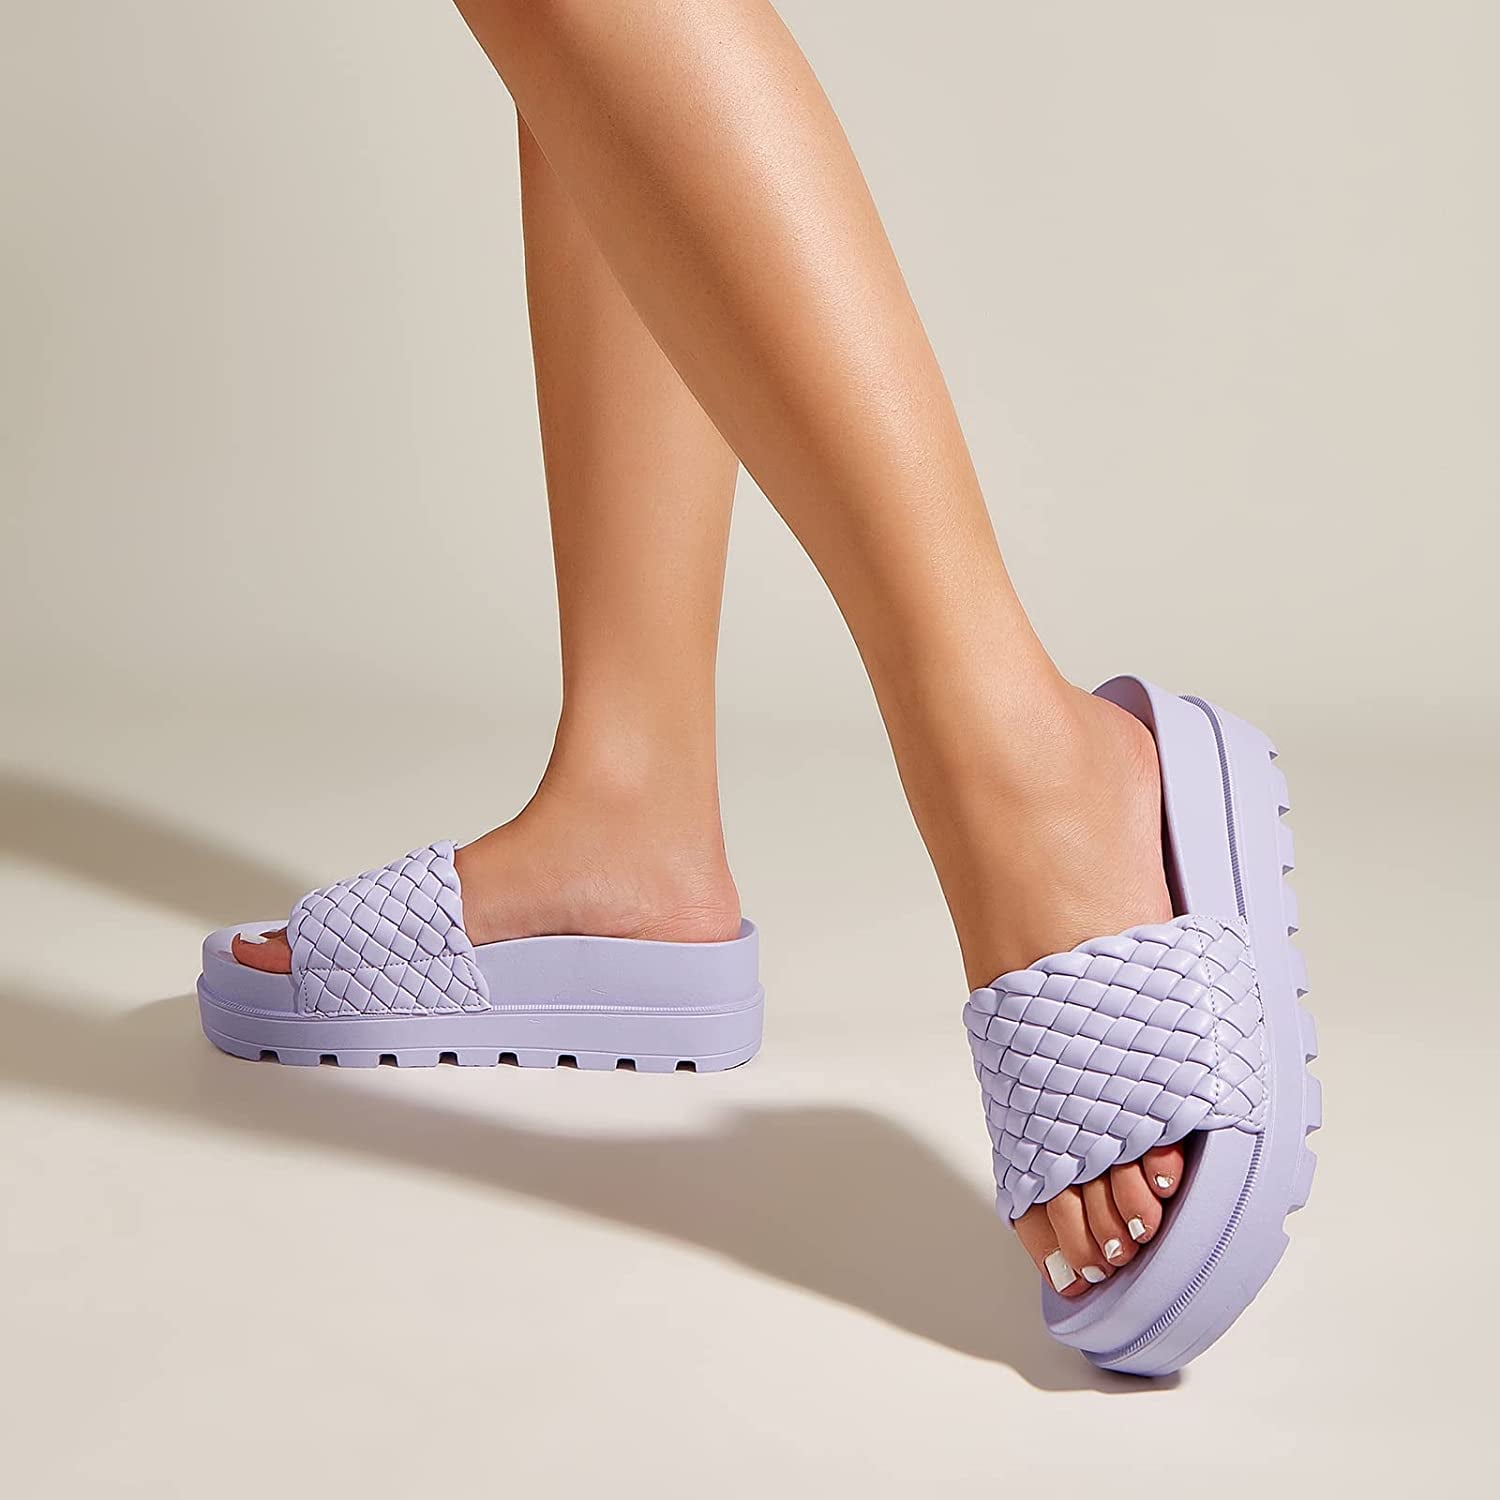 Will the chunky flip-flop be the shoe of the summer?